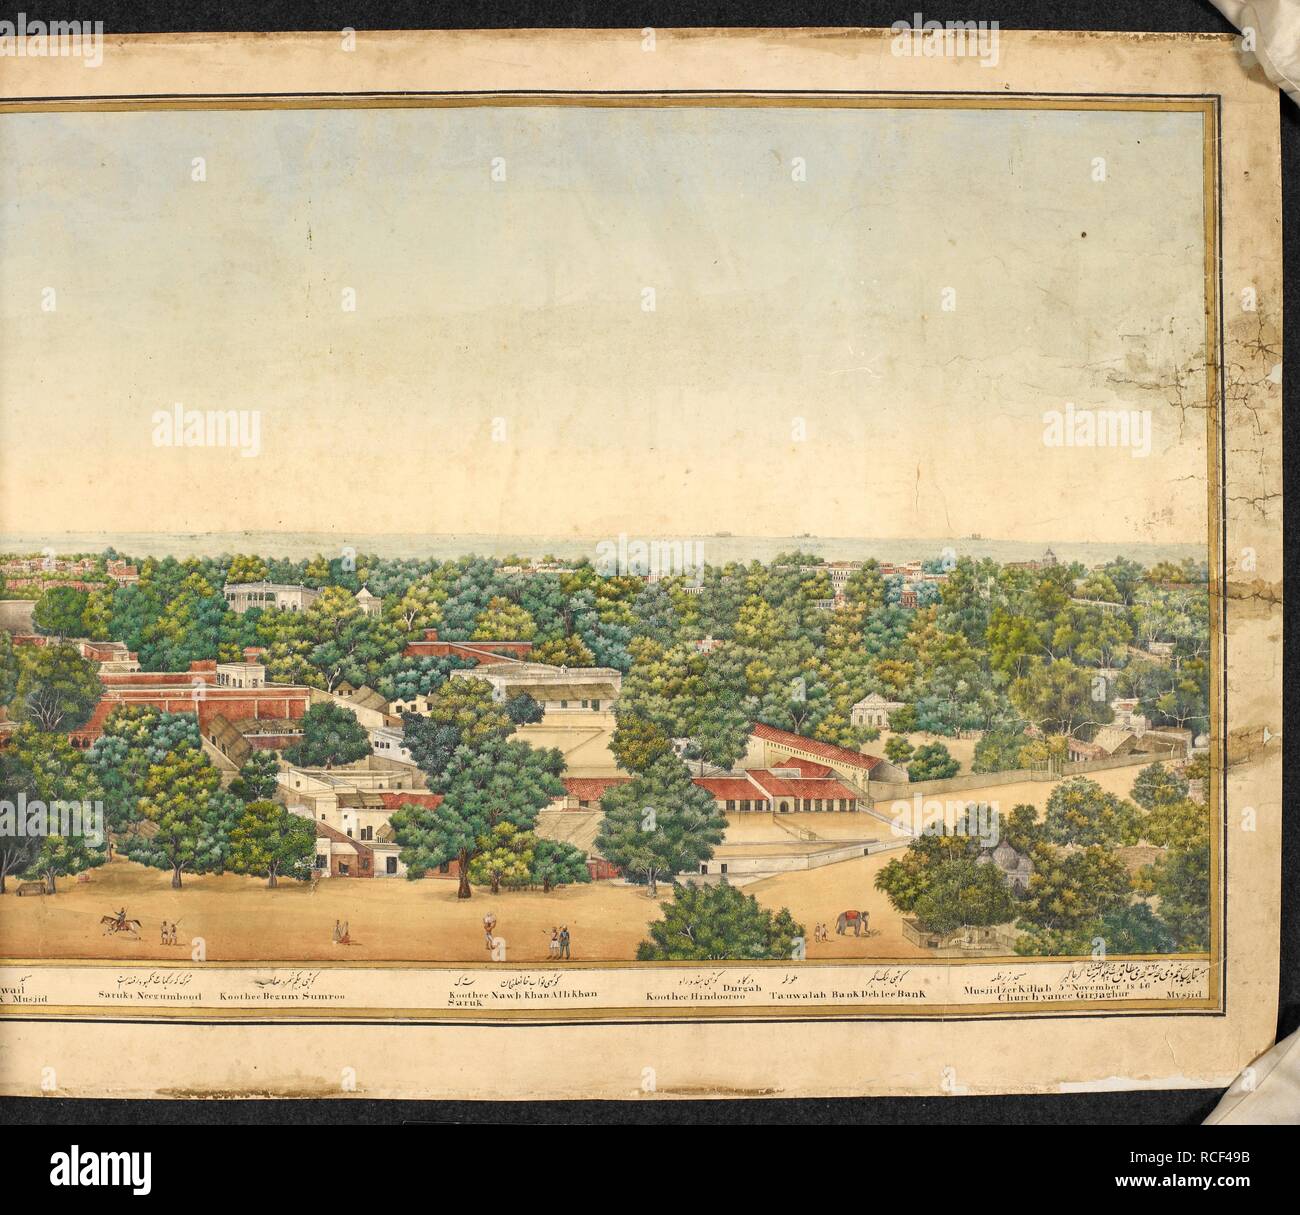 Last section of a panorama of Delhi. A panorama of Delhi. 25th November 1846. From a panorama of Delhi taken through almost 360 degrees from the top of the Lahore gate of the Red Fort, Delhi. Water-colour and body-colour with gold; 665 by 4908 mm (530 by 4828 mm within frame) on five sheets of paper, glued together to form a scroll. Source: Add.Or.4126. Language: Persian, Urdu and English. Author: Khan, Mazhar 'Ali. Stock Photo